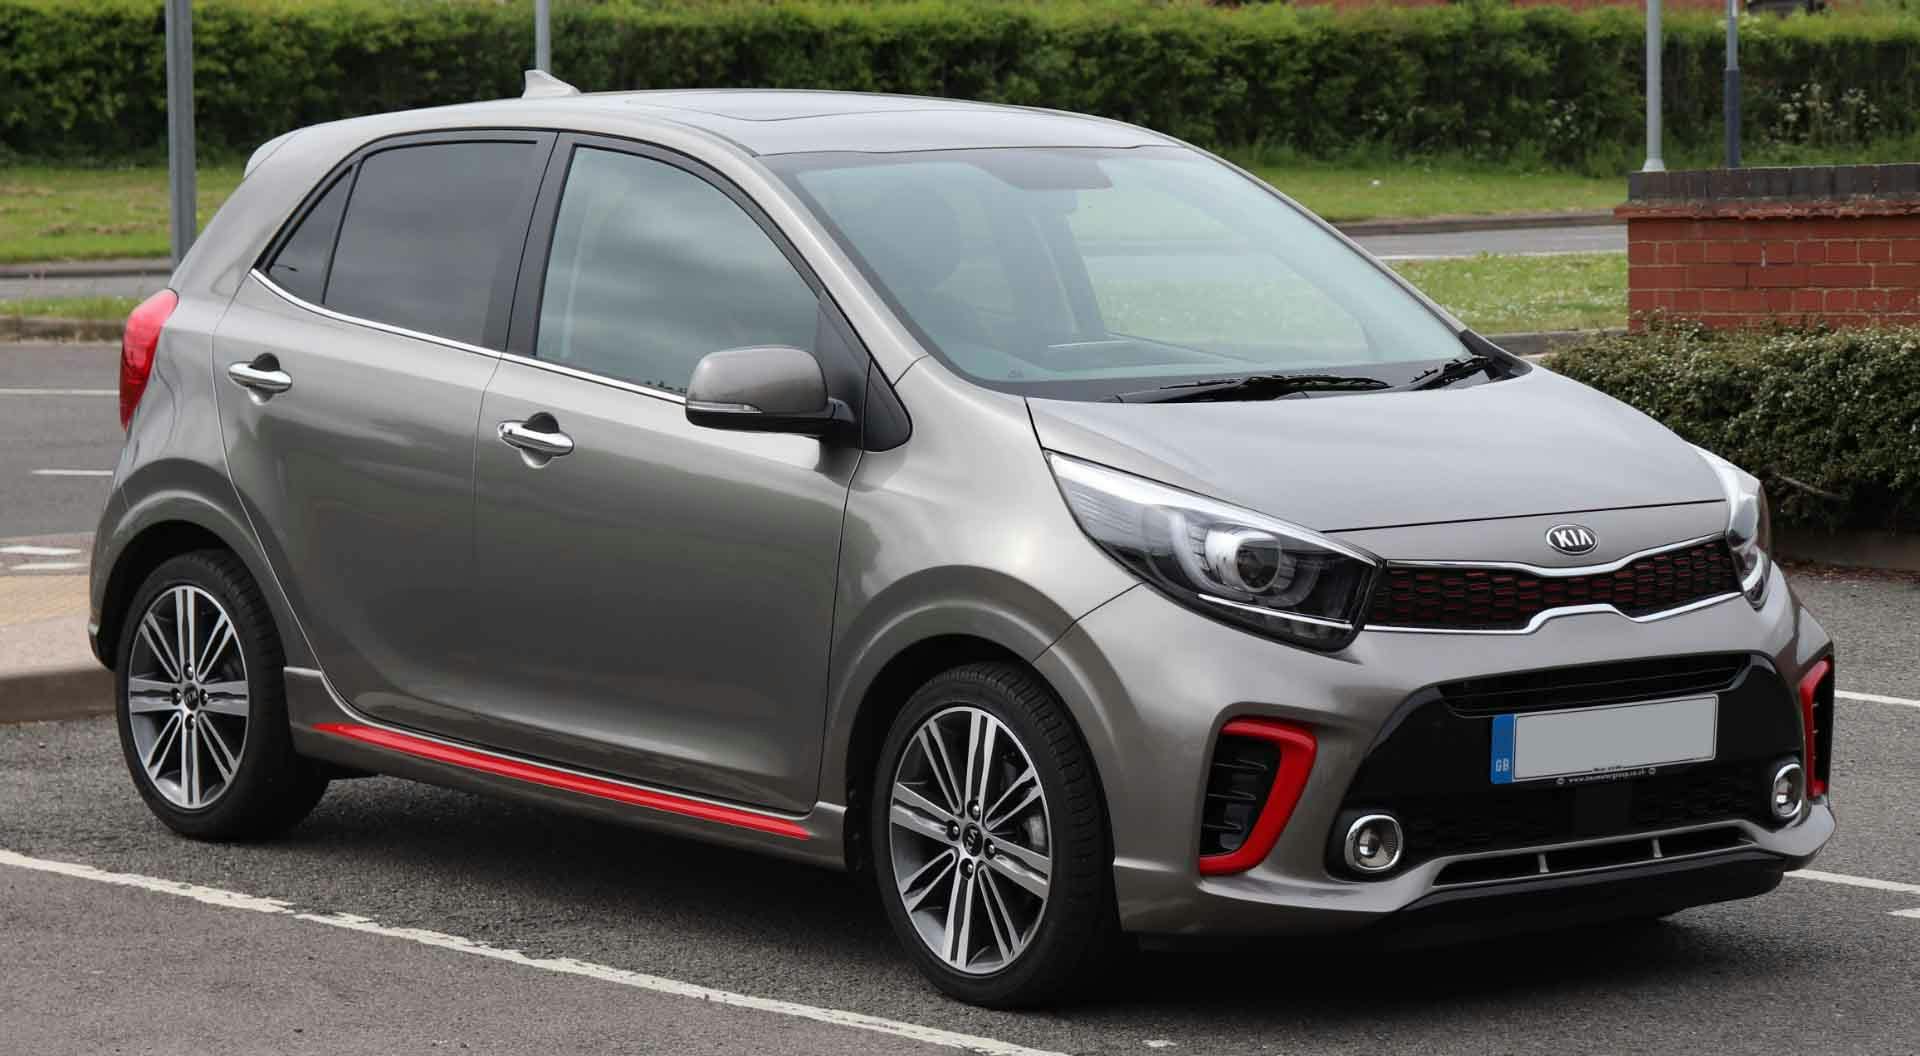 kia-picanto-price-in-pakistan-specs-and-features